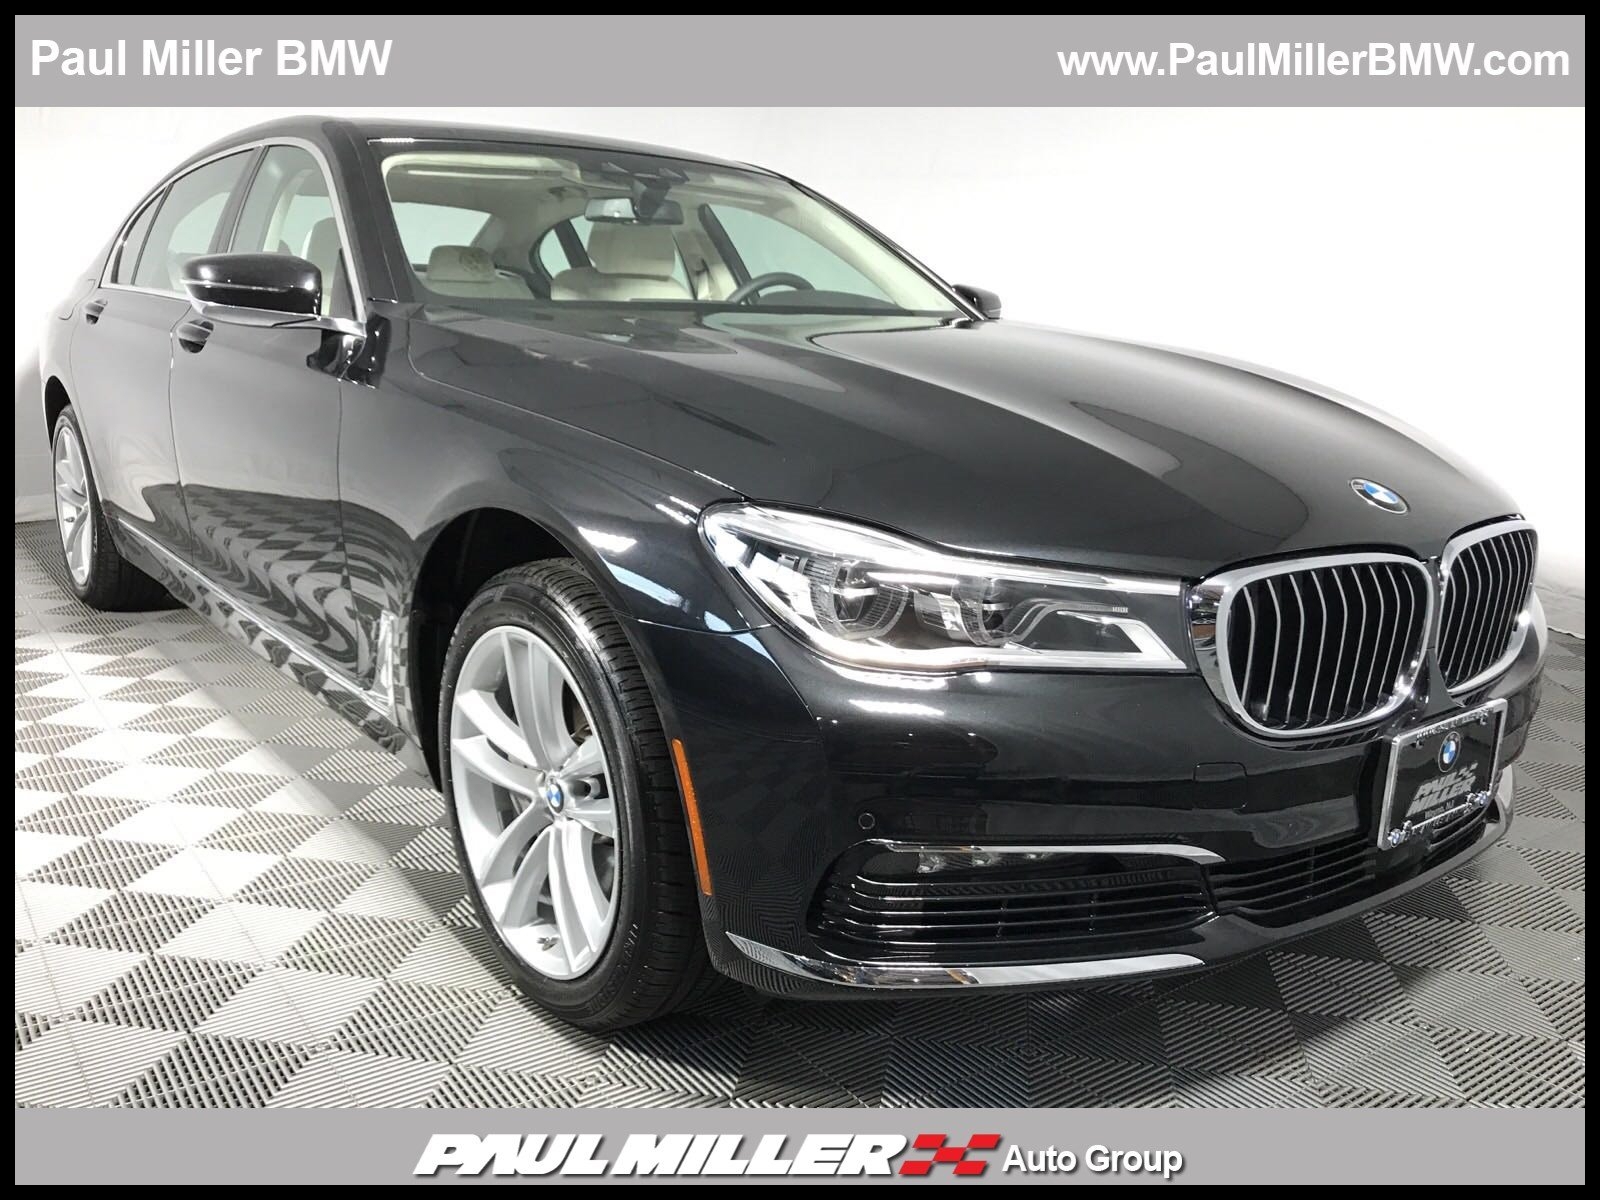 Bmw Cpo Warranty Review Certified Pre Owned 2018 Bmw 7 Series 4dr Car In Wayne L